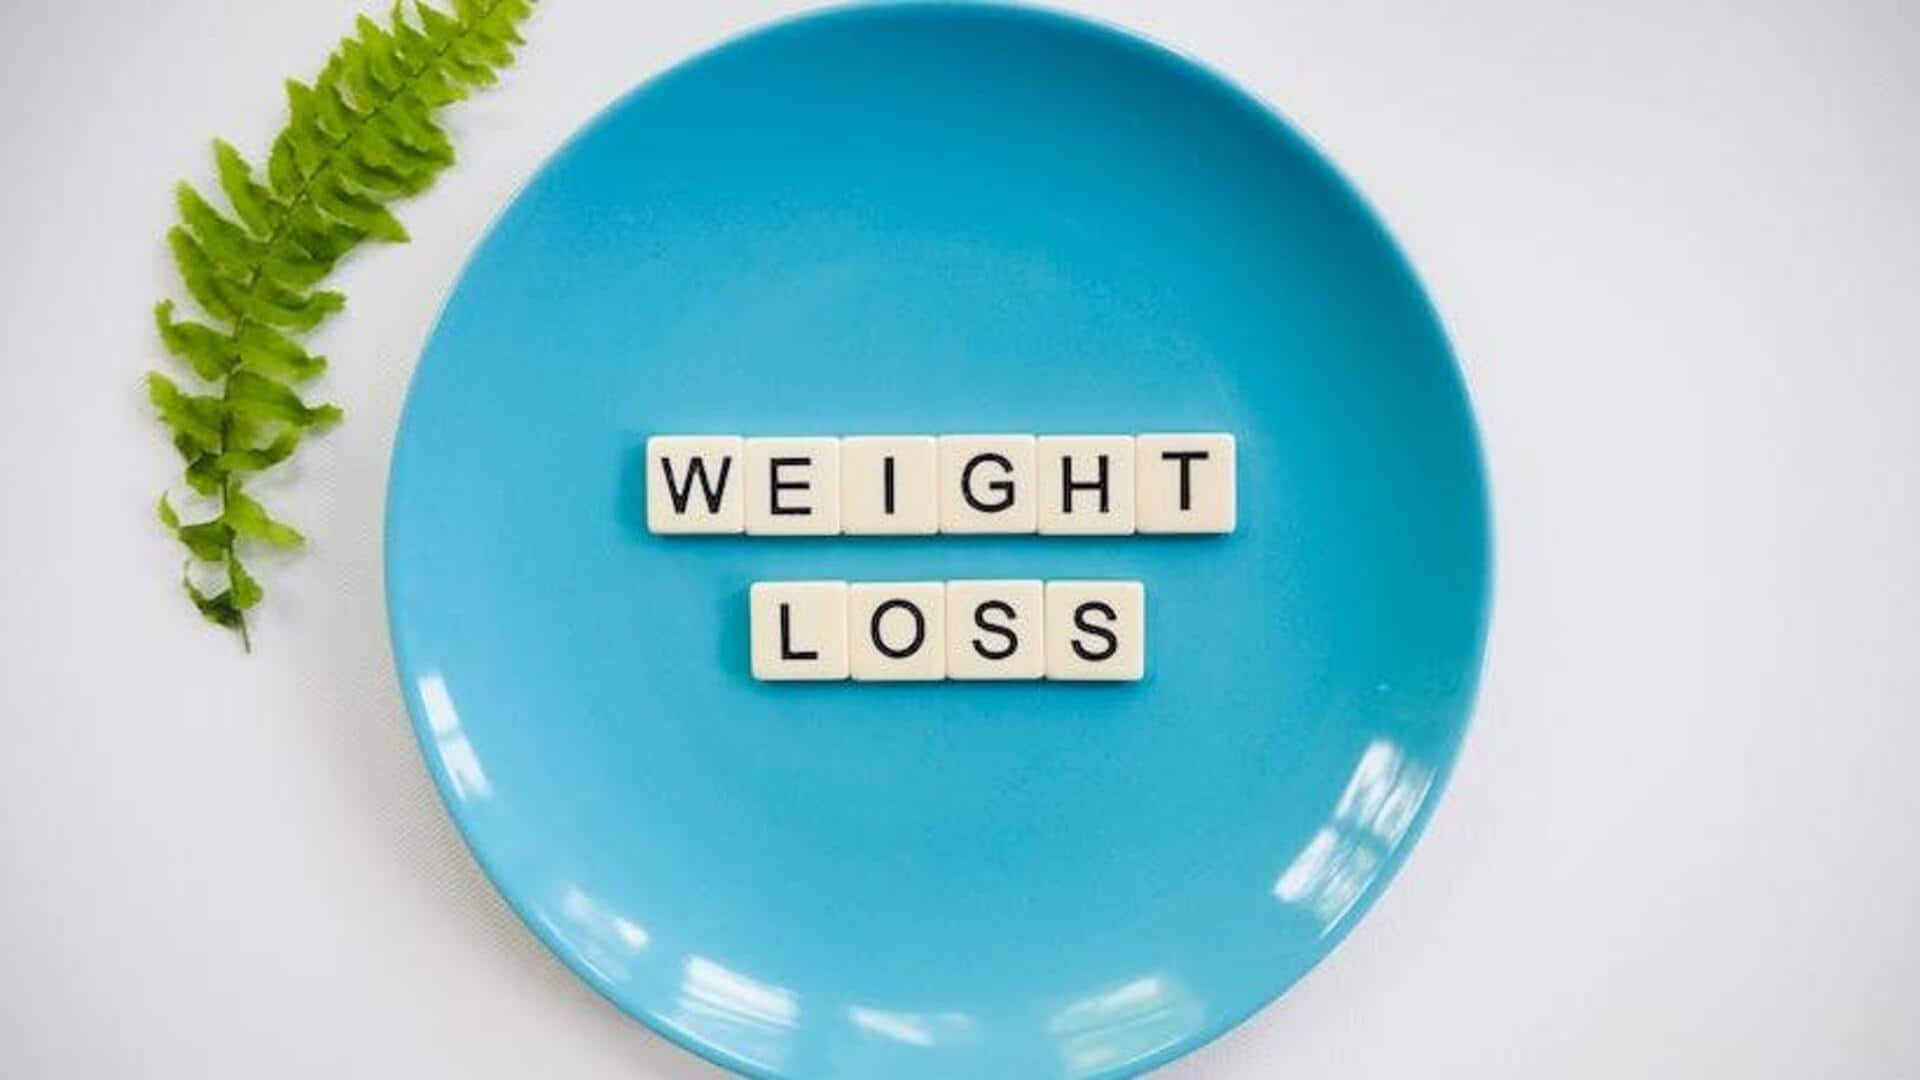 Small meals v/s intermittent fasting: What's ideal for weight loss